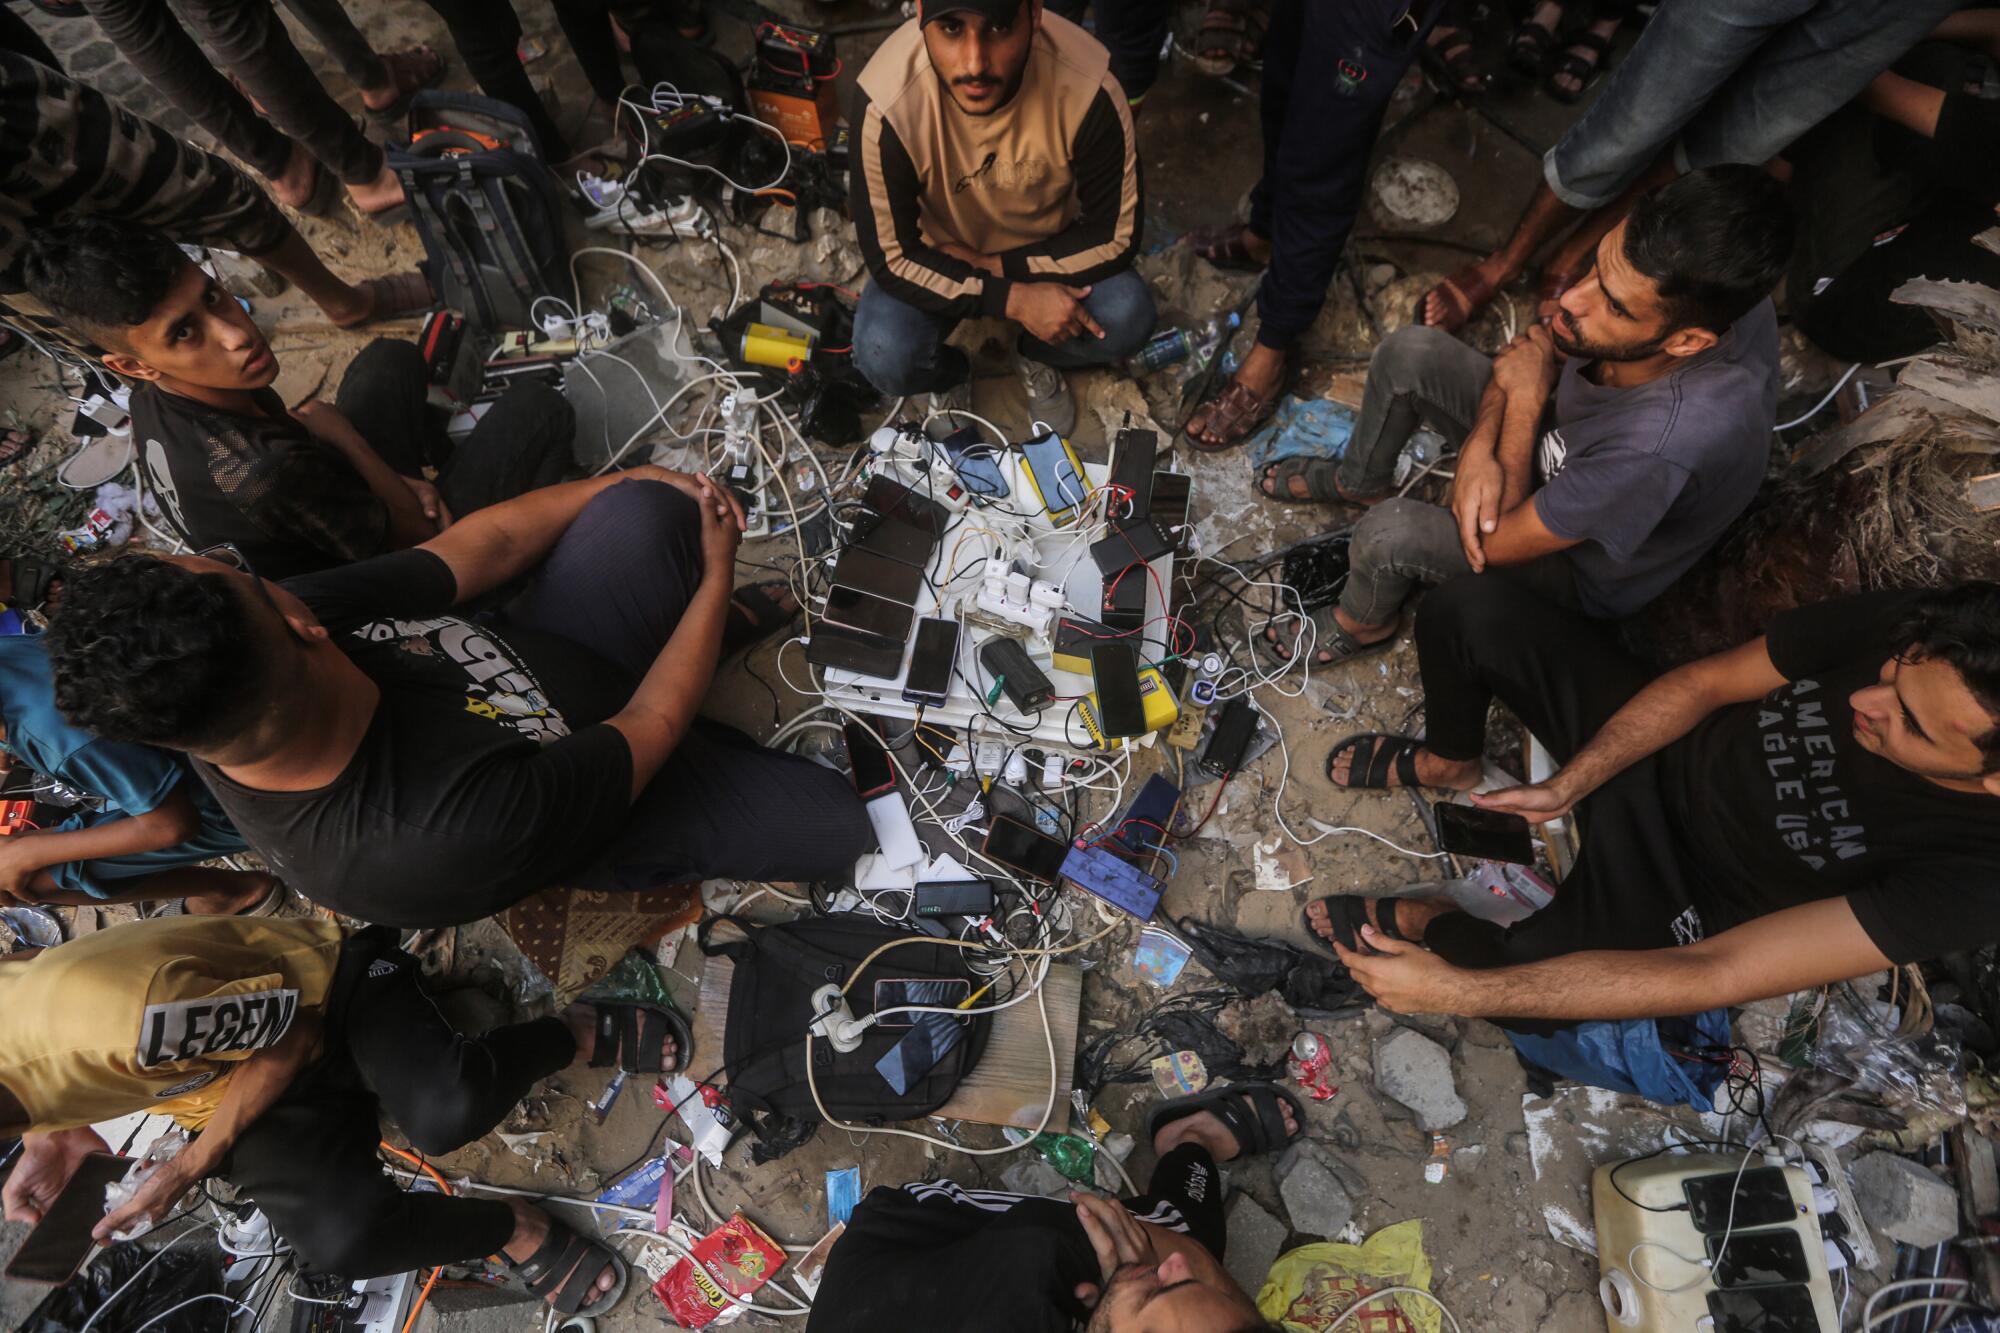 Palestinians who fled to southern Gaza to escape Israeli airstrikes charge their phones